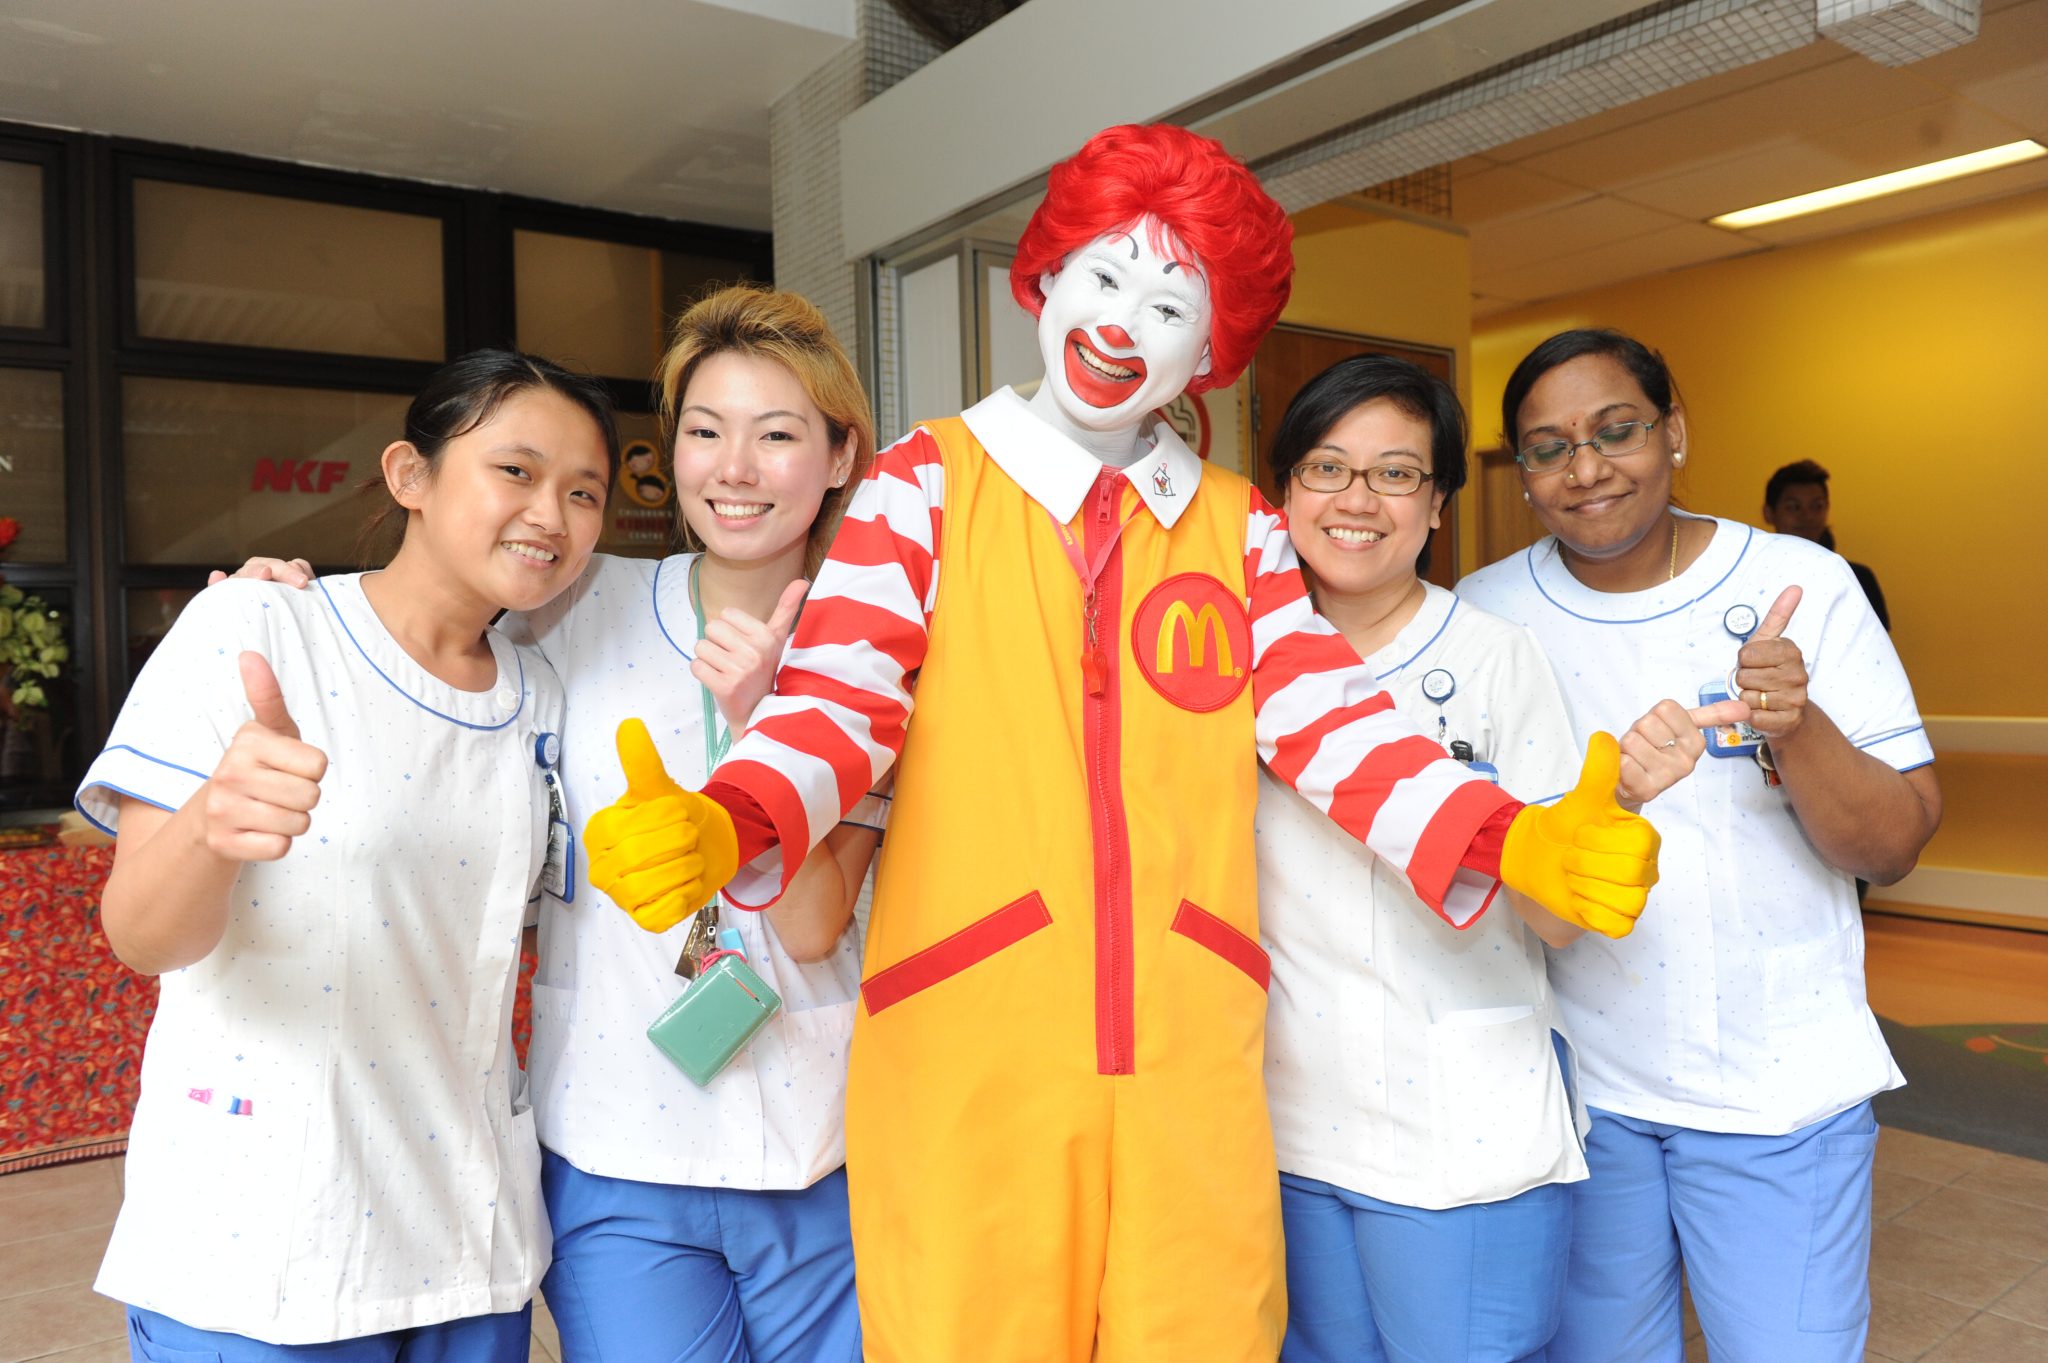 Relationship with McDonalds RMHC Singapore